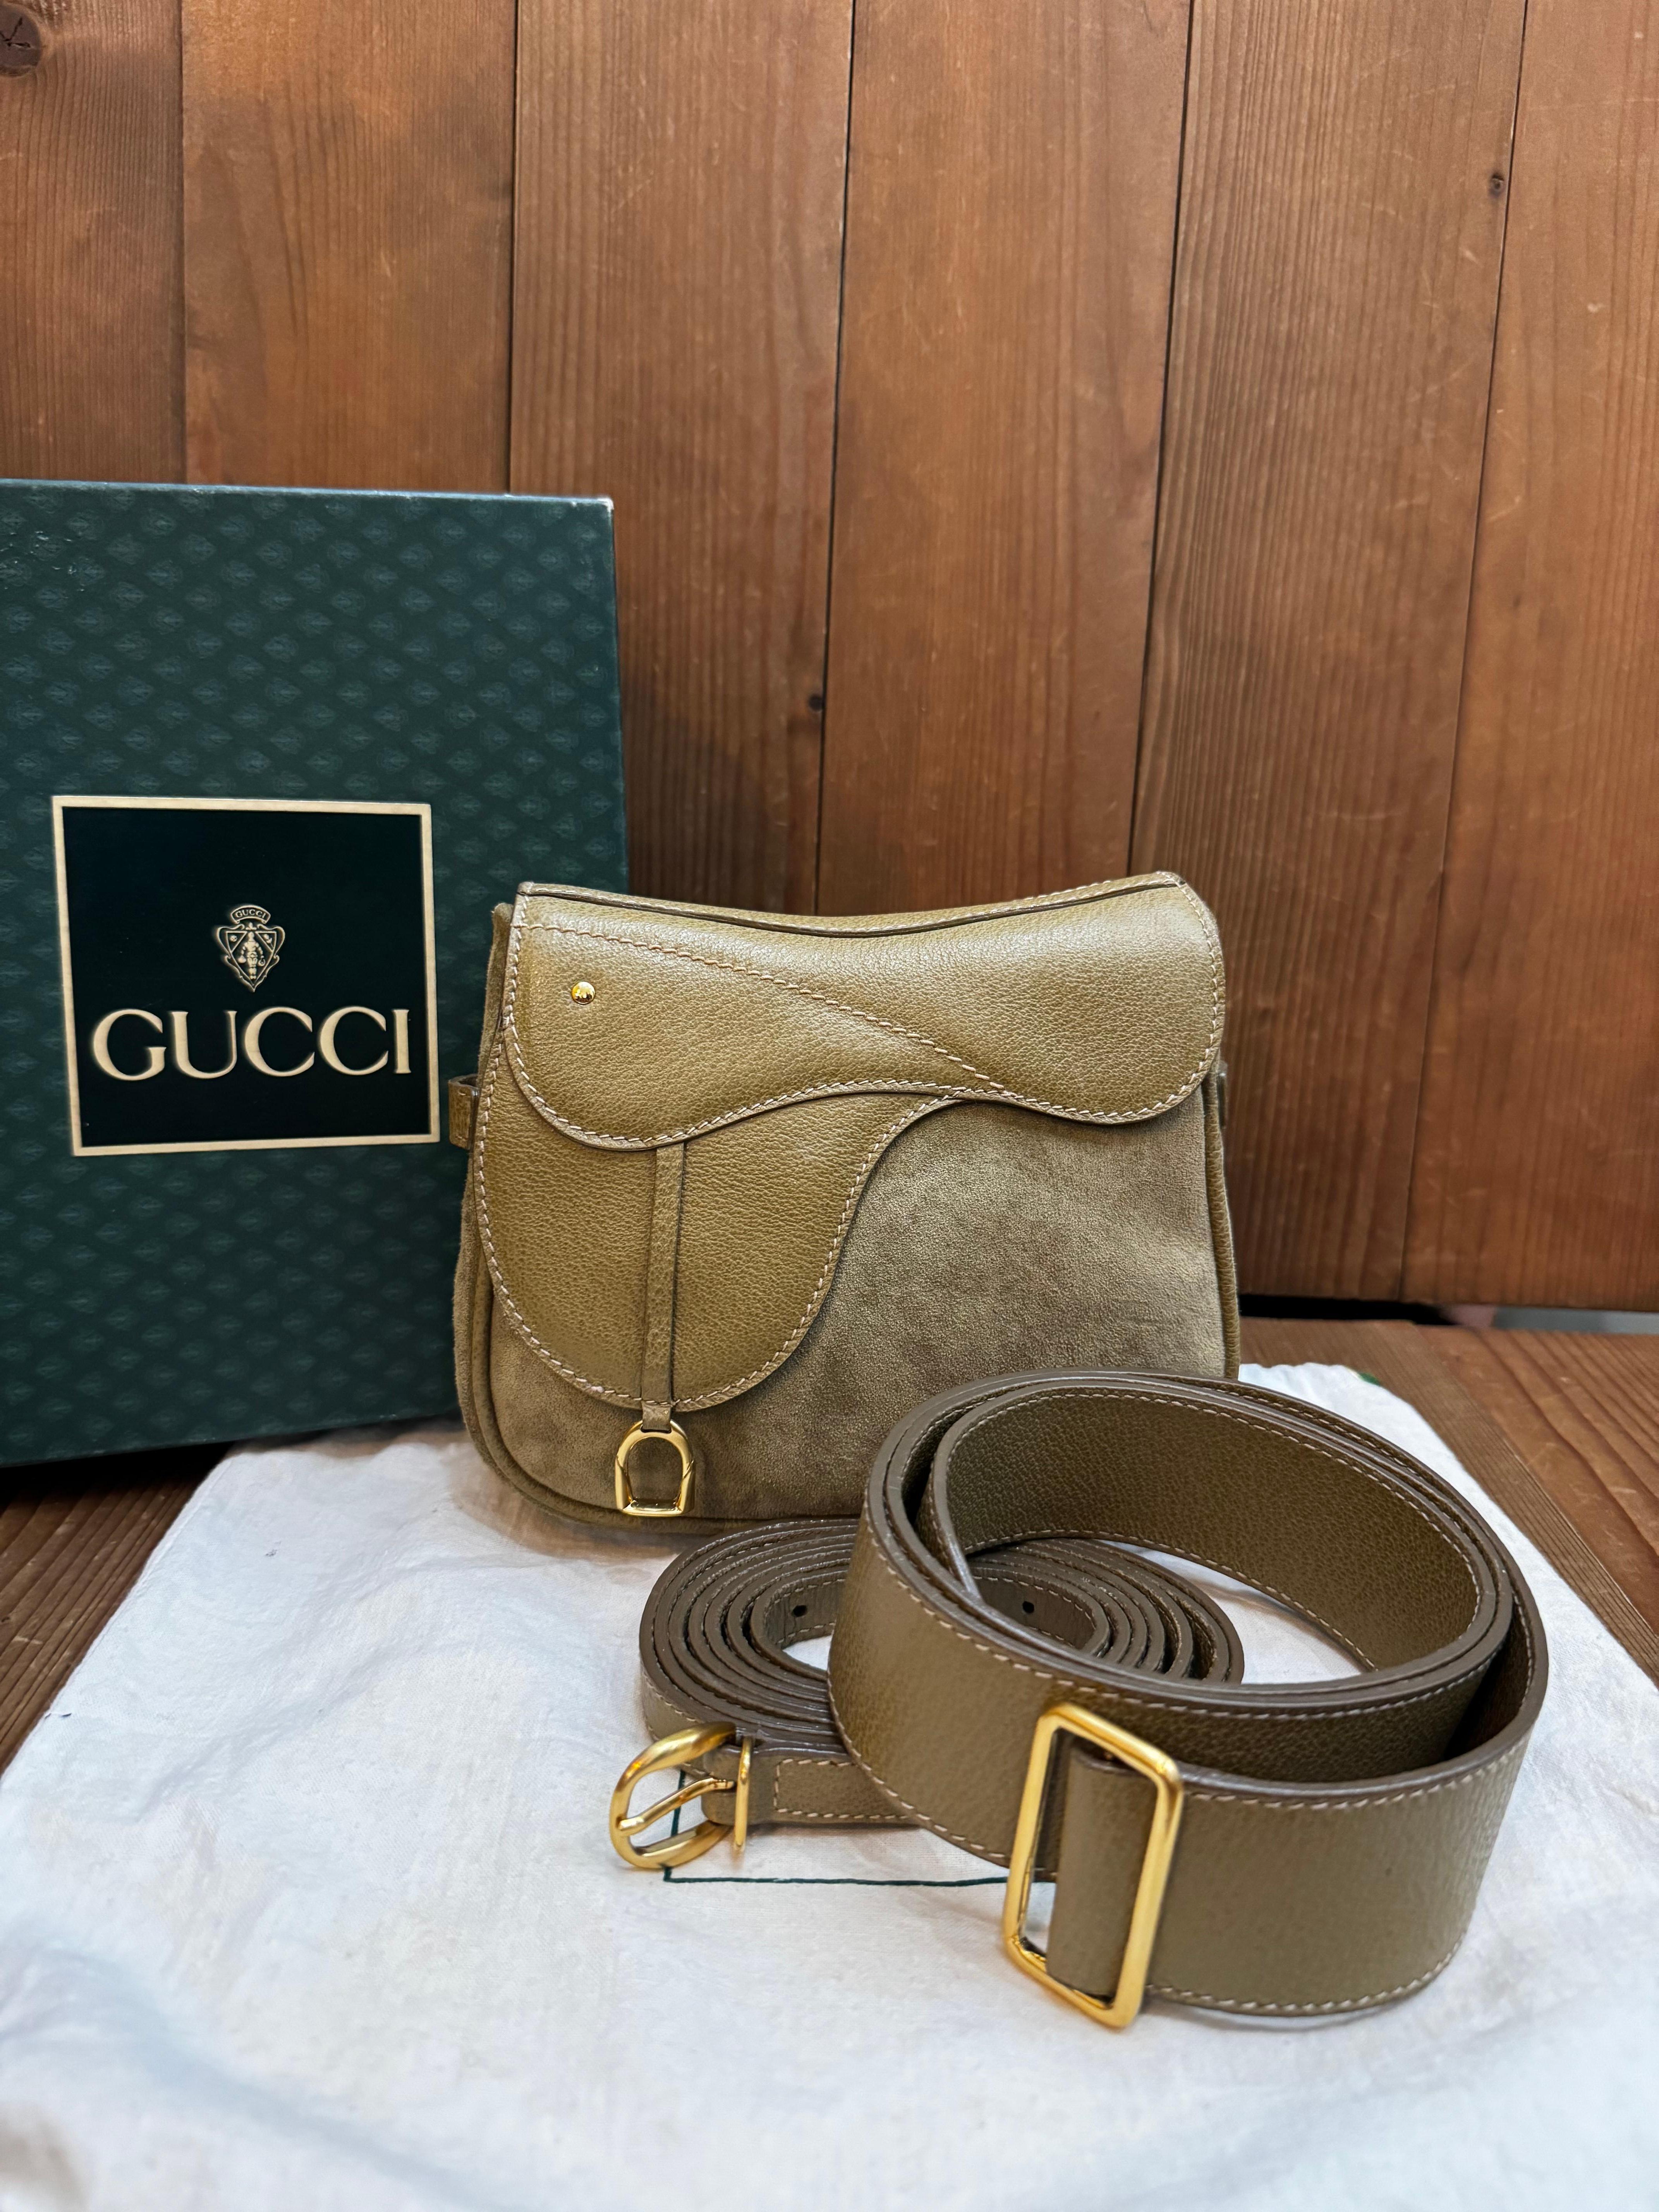 This vintage GUCCI mini saddle bag is crafted of pigskin and nubuck leather in khaki featuring gold toned hardware. This bag features a detachable crossbody strap and a belt of the same leather for wearing it as a crossbody or belt bag. Front